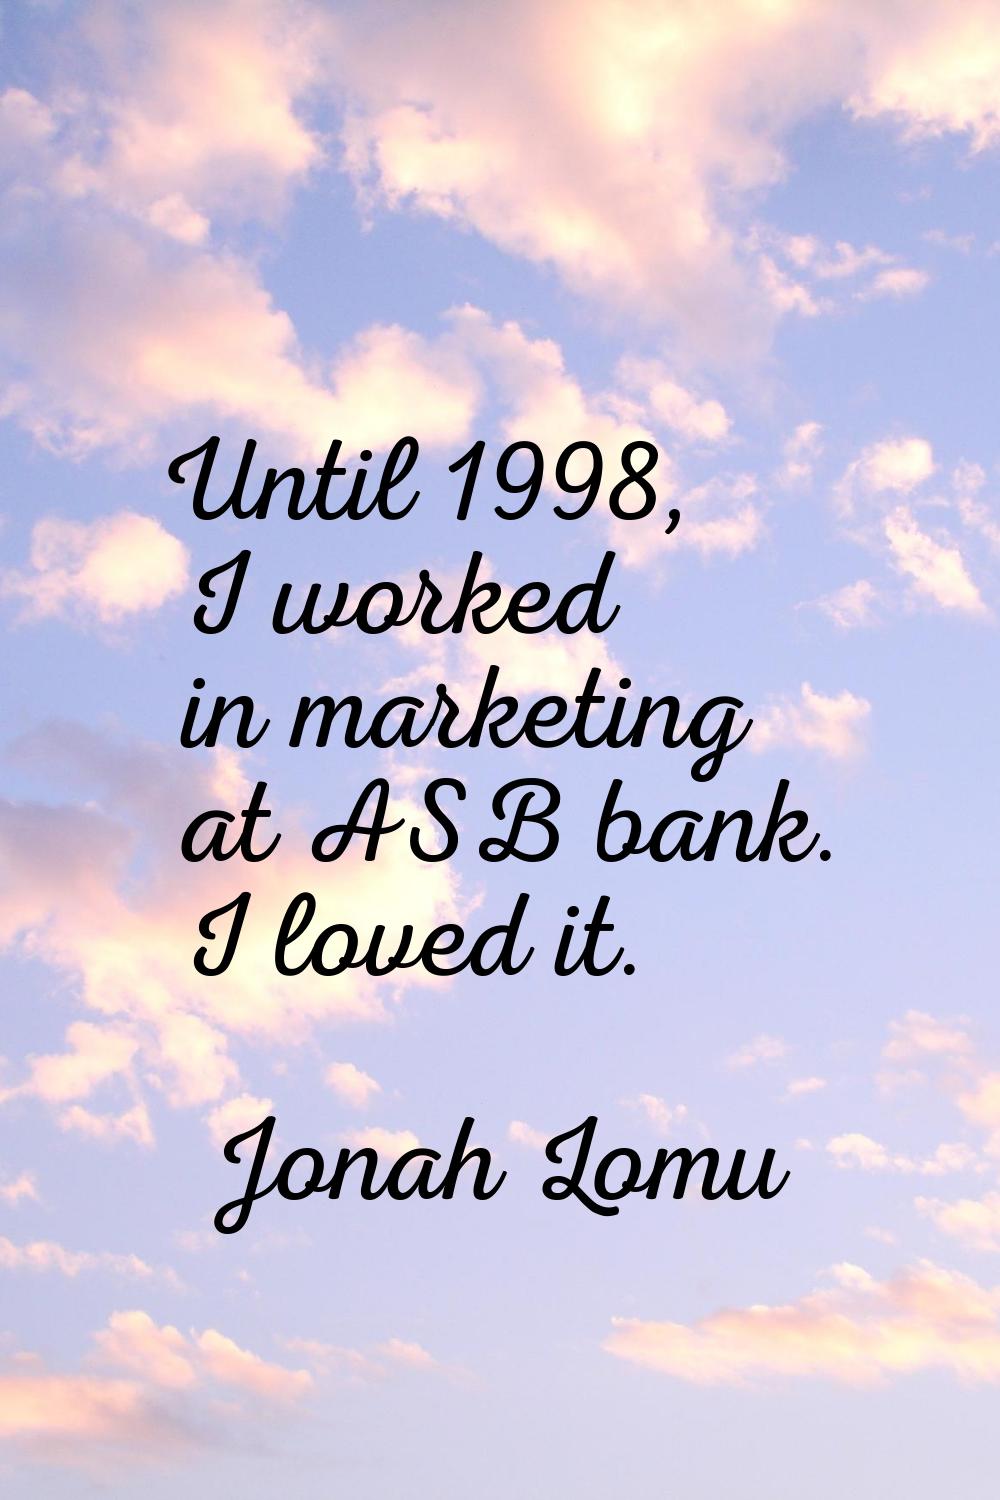 Until 1998, I worked in marketing at ASB bank. I loved it.